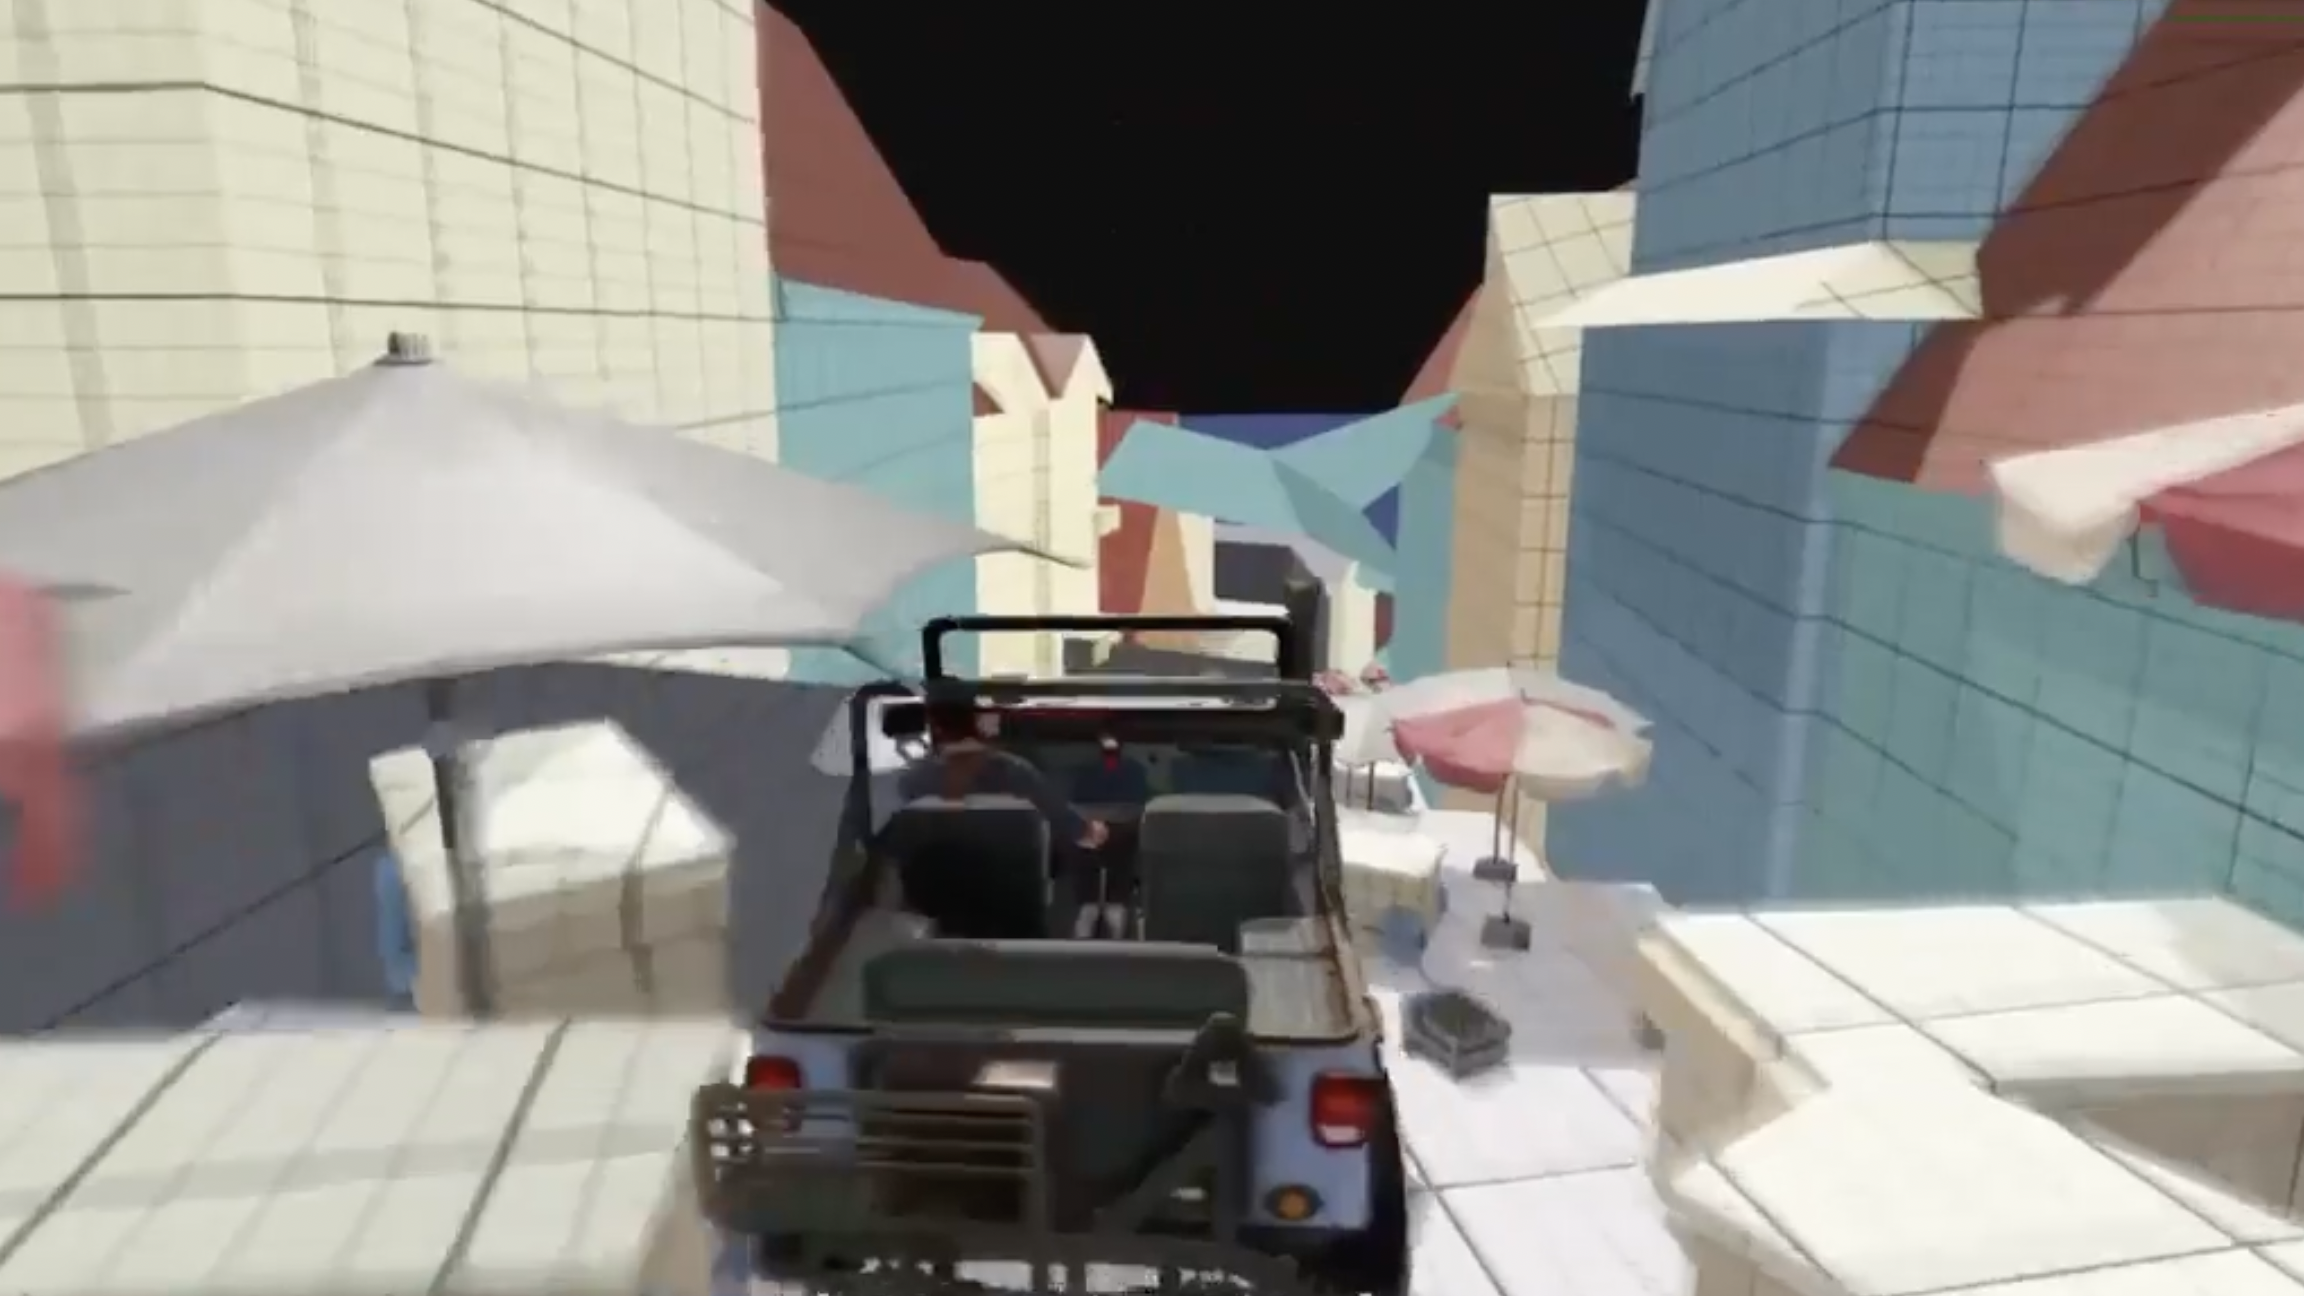 Devs show off how bad early game builds look after moans about GTA 6’s visuals